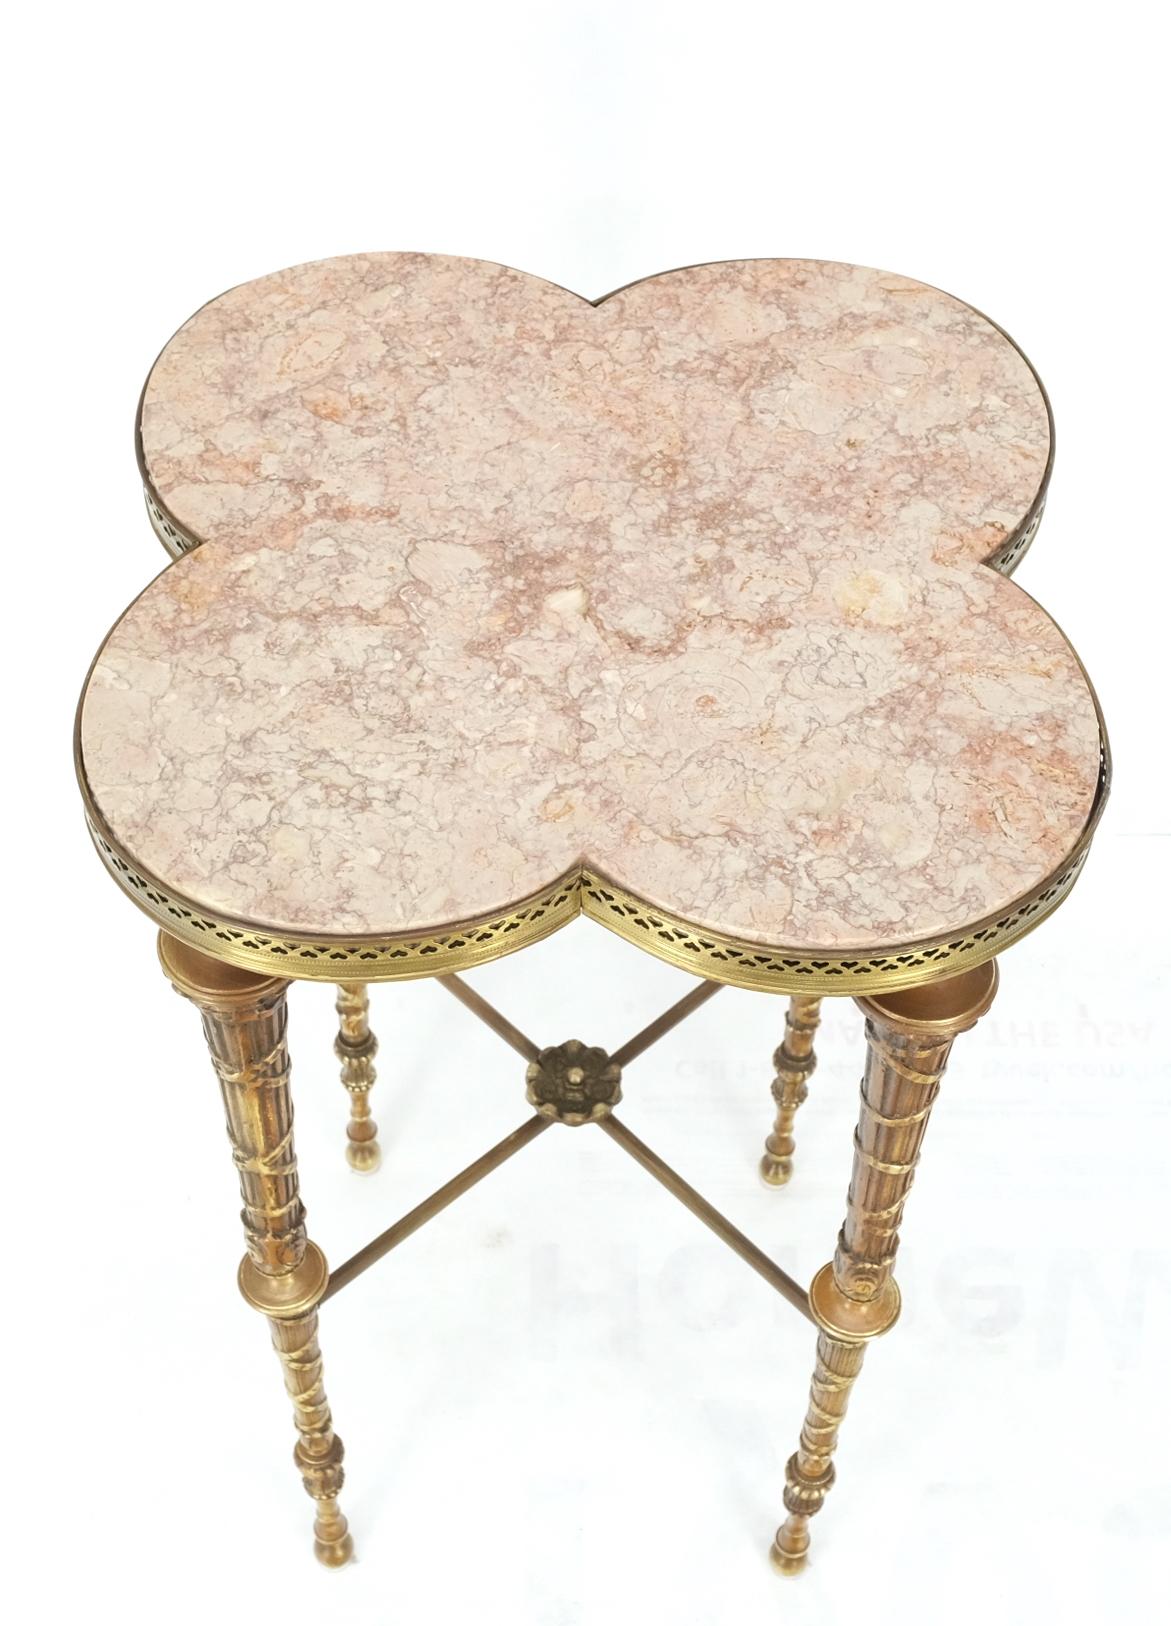 Exception Clover Shape Pink Marble Top Fluted Brass Legs Tall Pedestal Stand For Sale 7